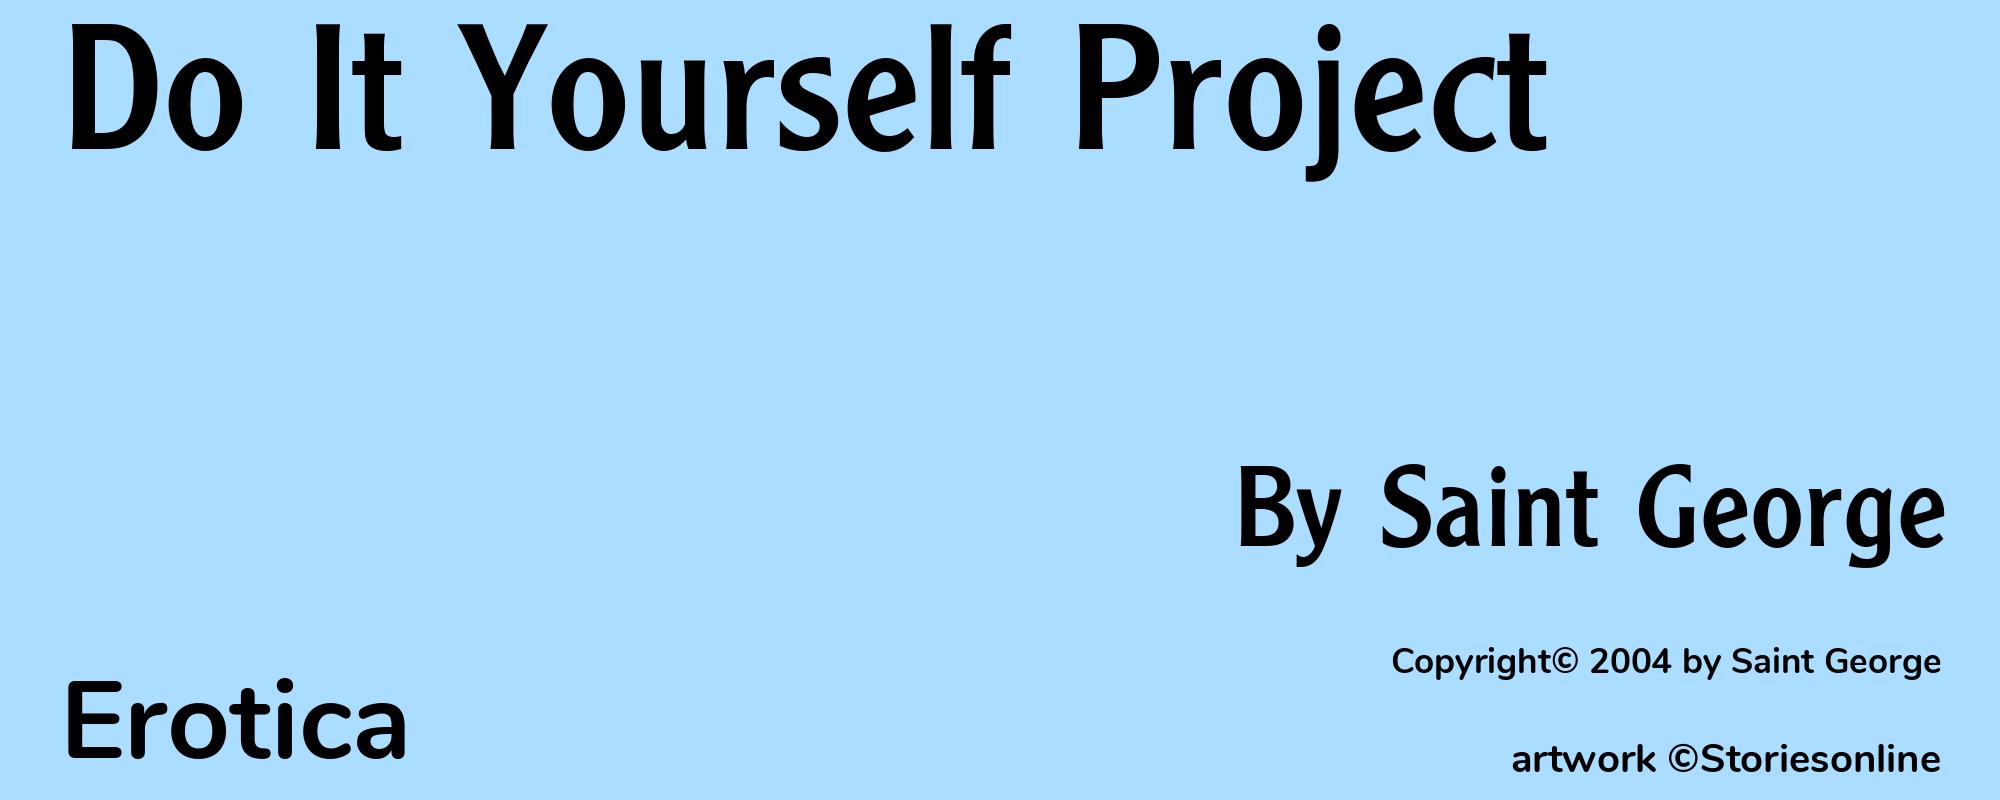 Do It Yourself Project - Cover